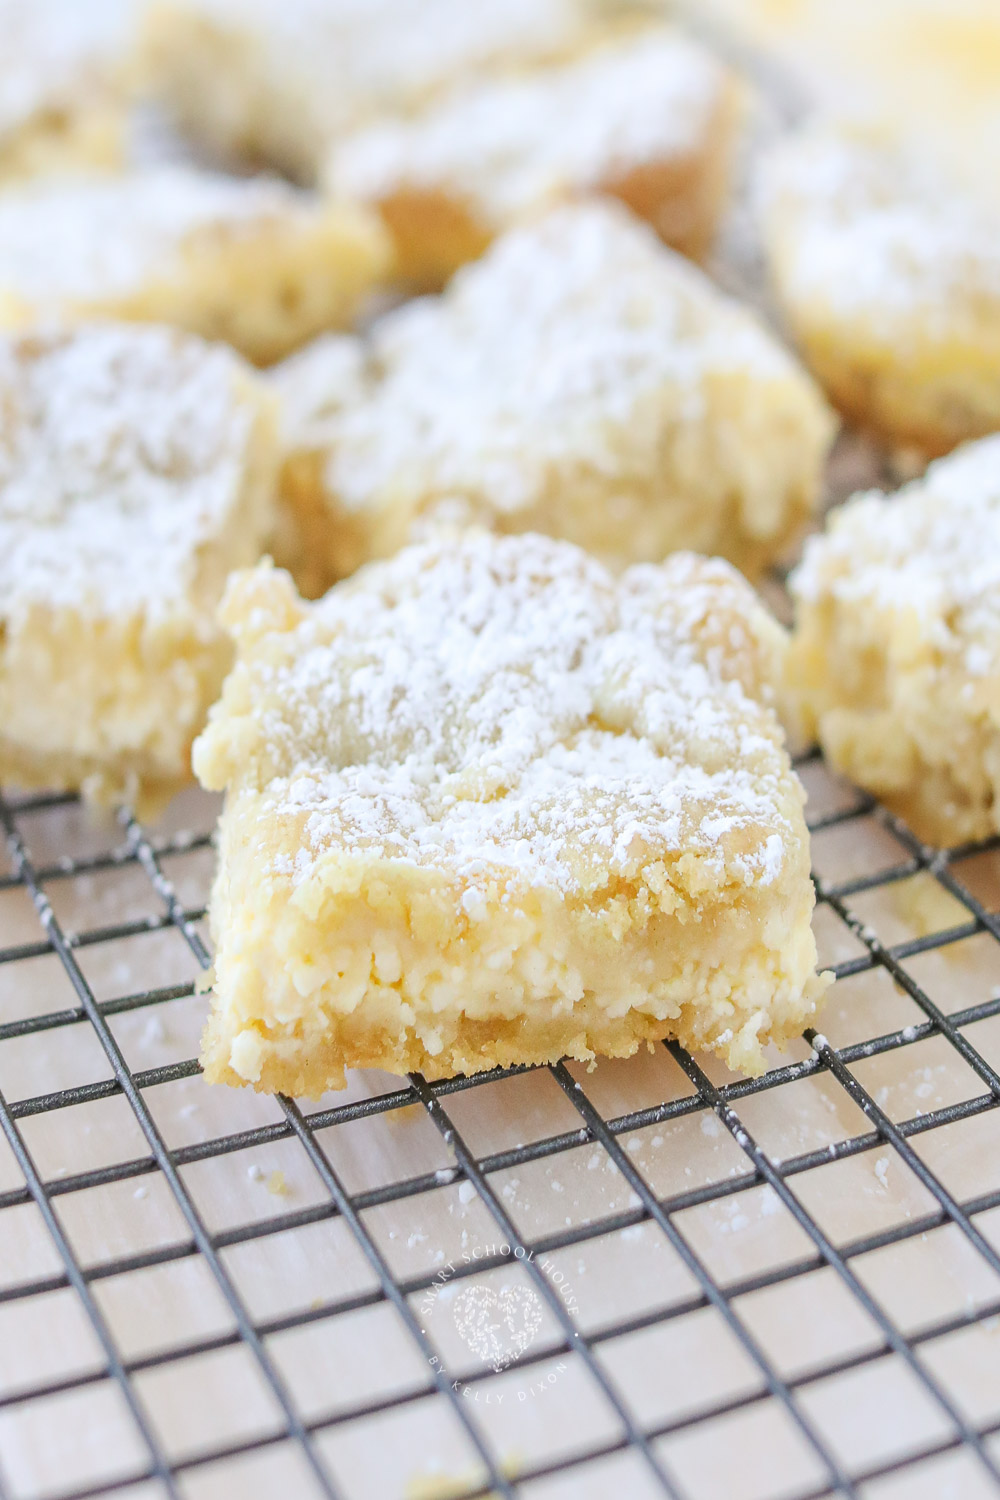 Easy Lemon Cheesecake Bars with a sugar cookie crust! The perfect combination of creamy, sweet, and tart. These lemon squares are a fuss-free recipe that pretty much anyone can make.